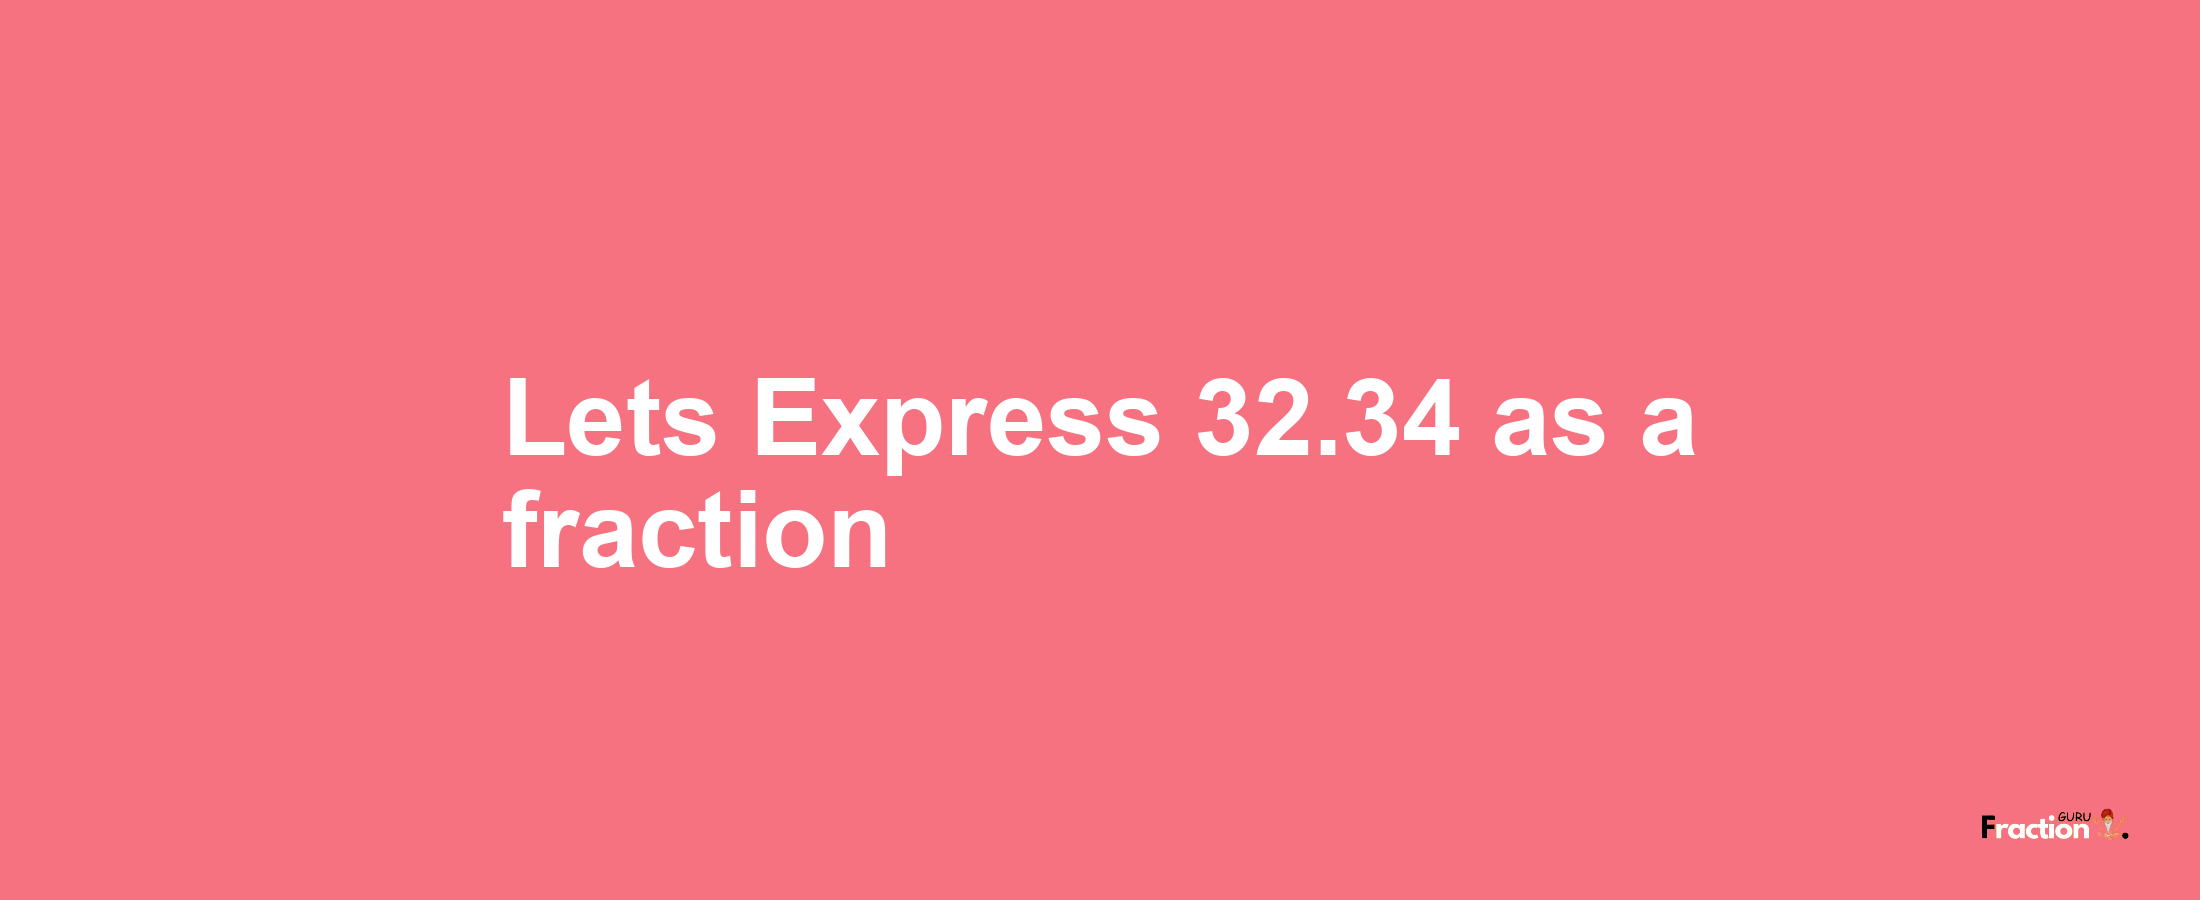 Lets Express 32.34 as afraction